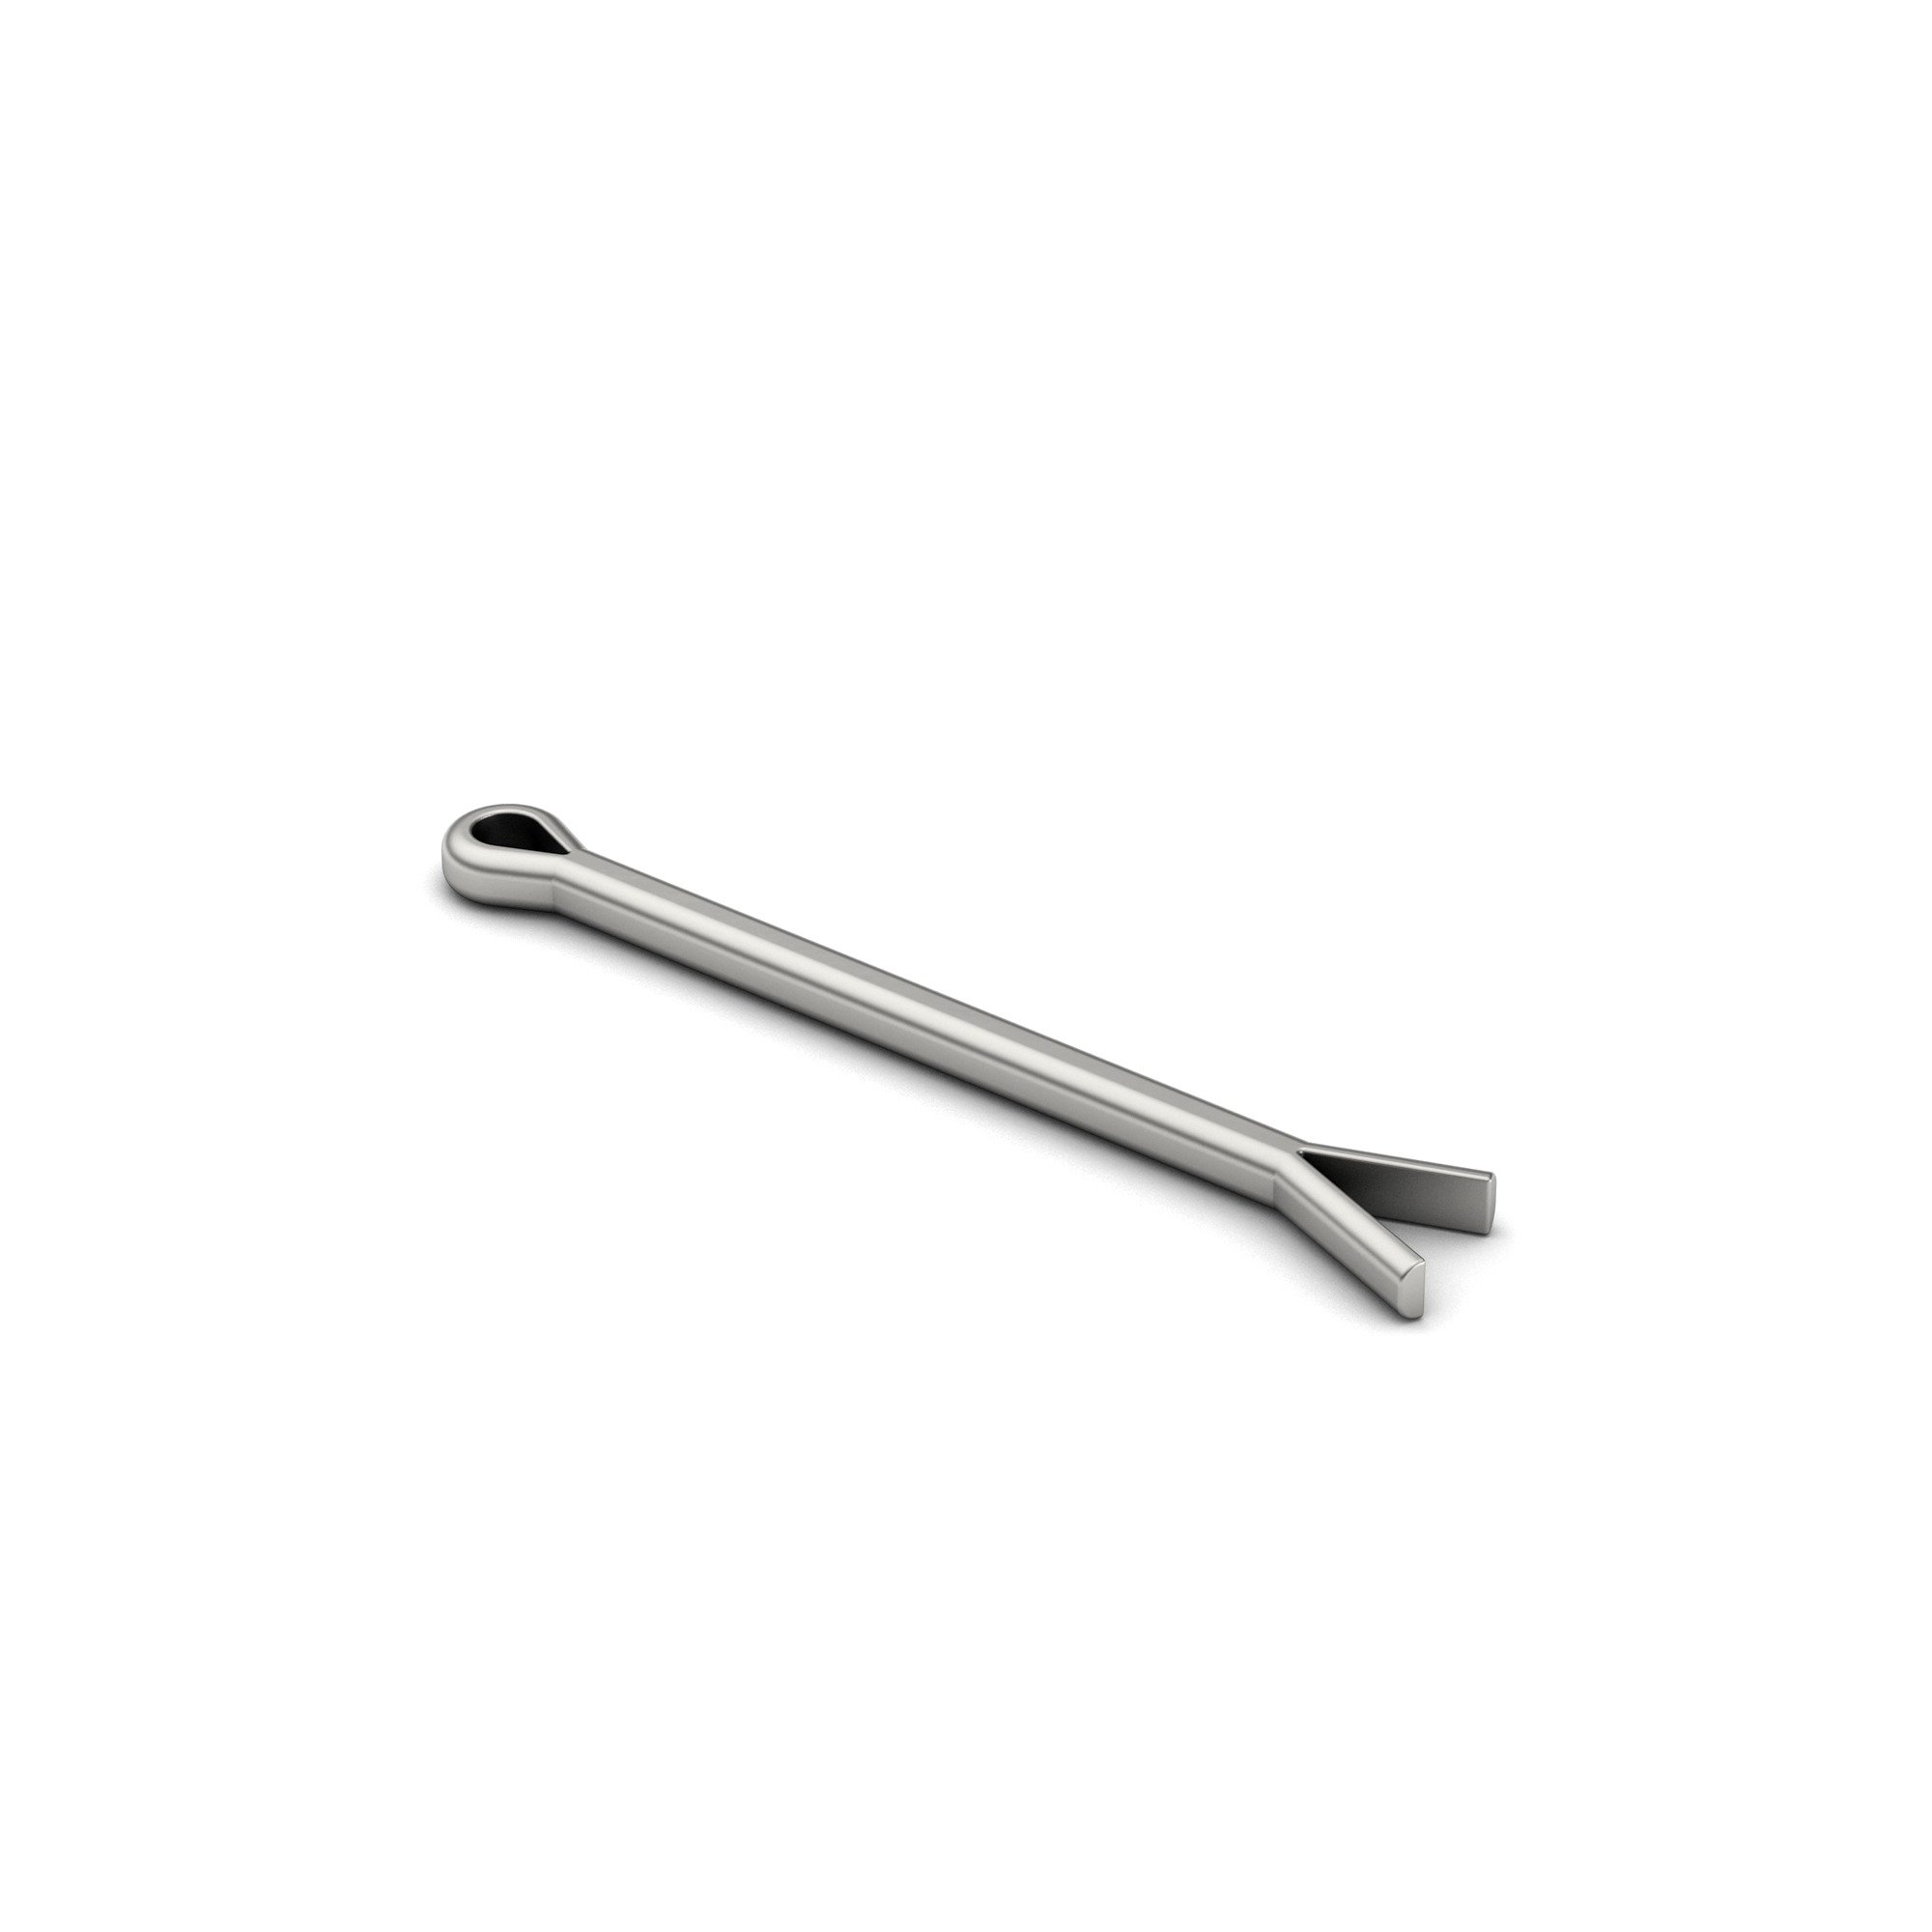 3/8x3 1/2 Carbon Steel Cotter Pin Extended Tip Plain Finish